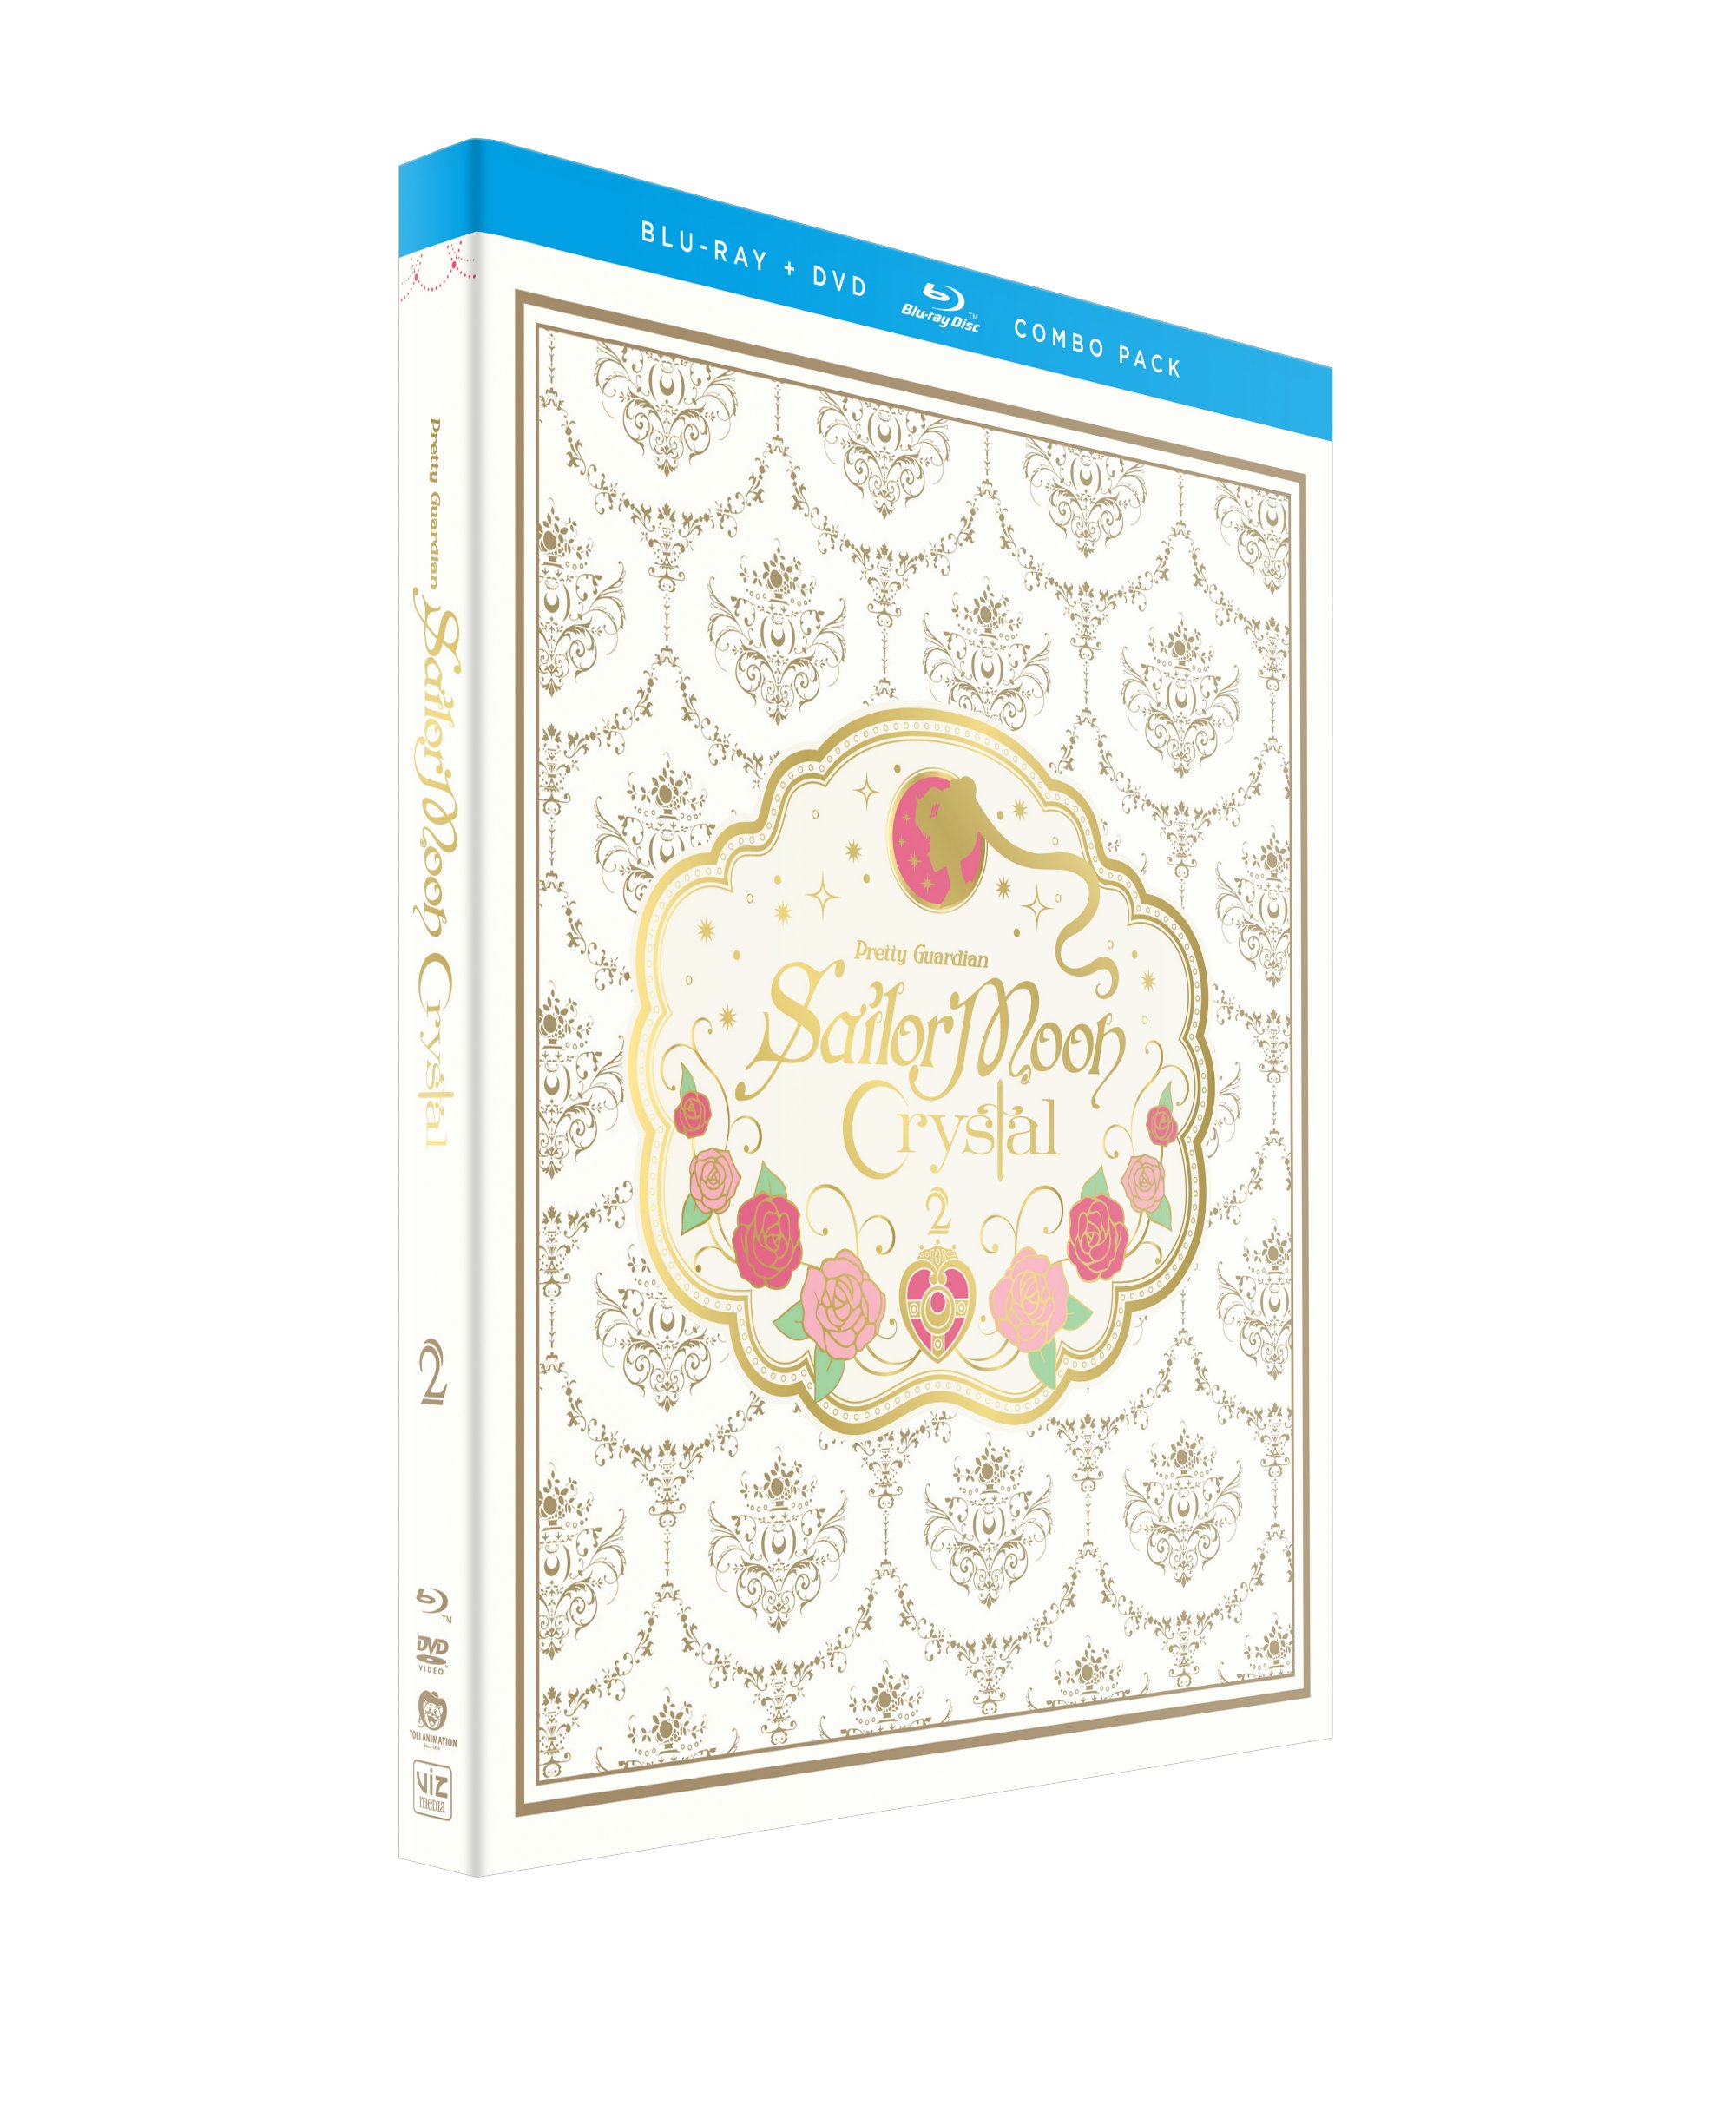 Sailor Moon Crystal Set 2 Limited Edition Blu-ray/DVD image count 2